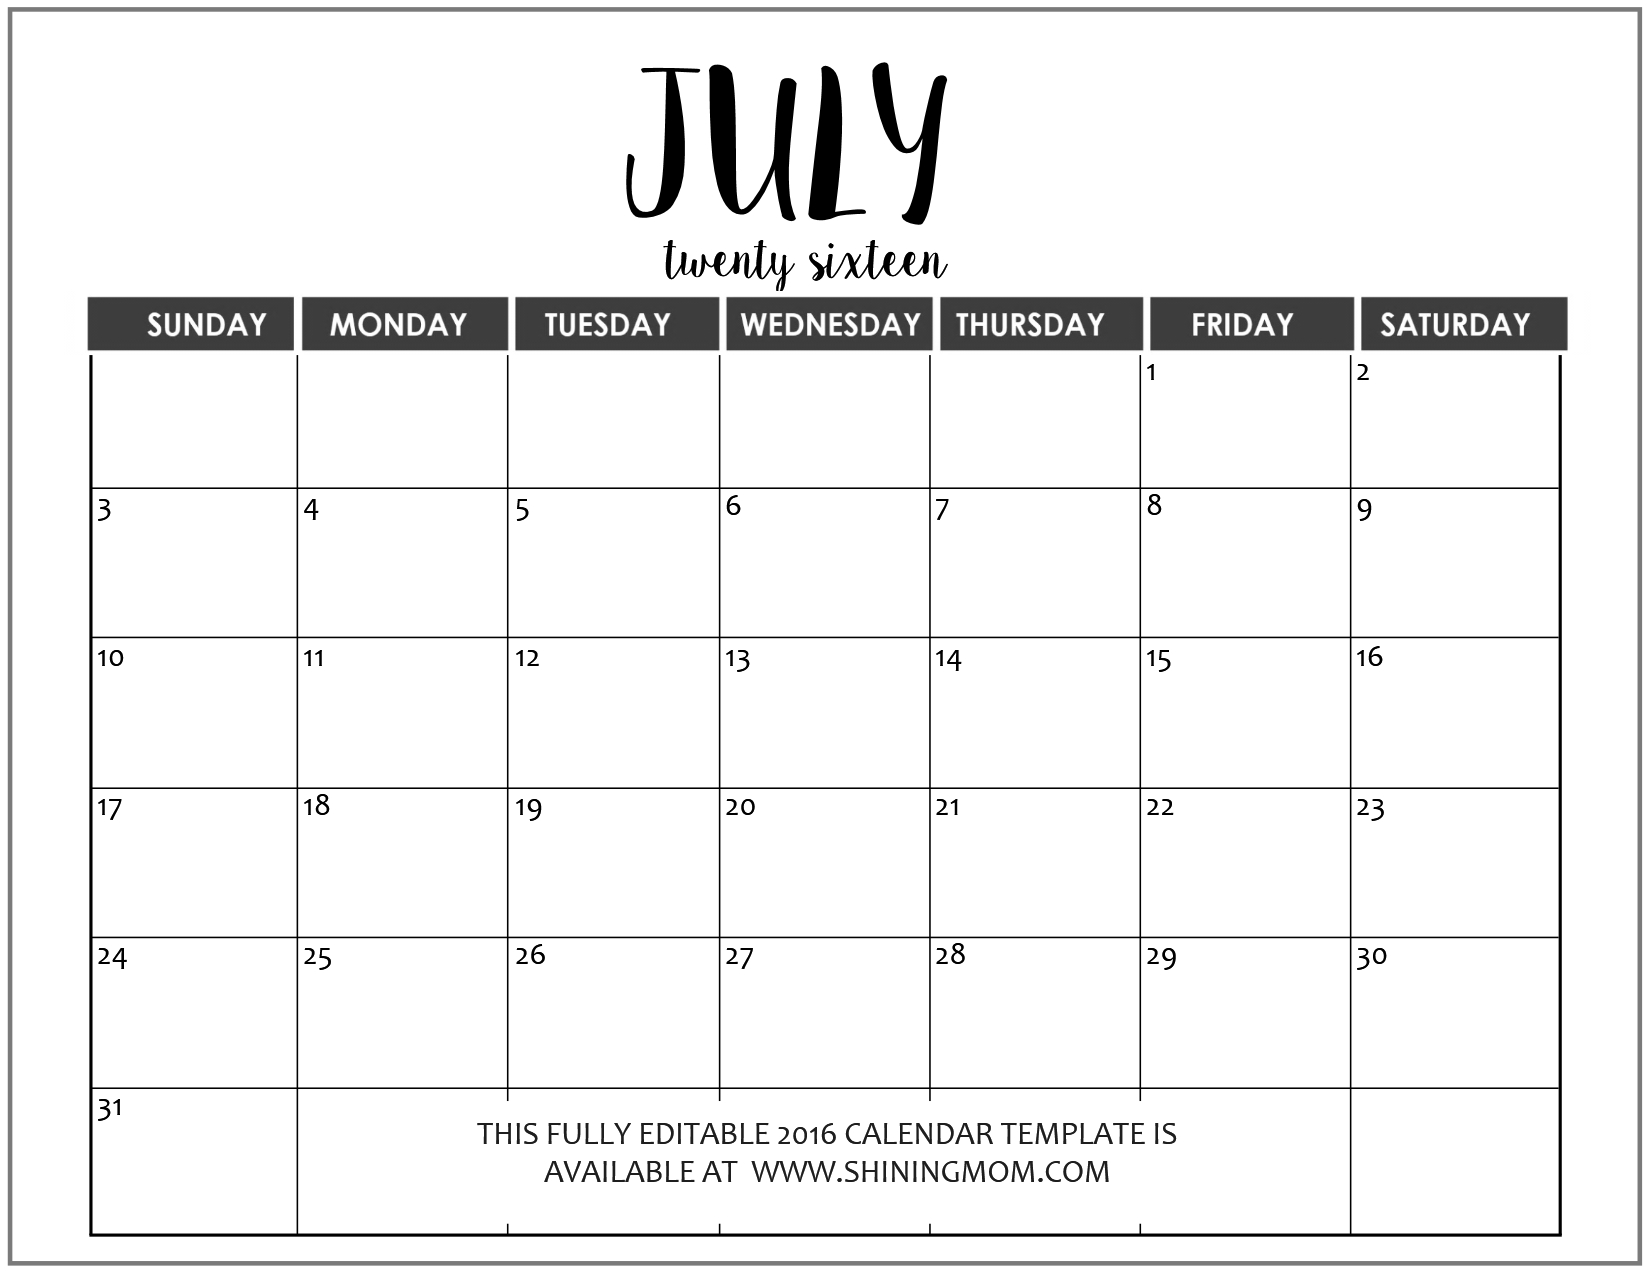 Just In: Fully Editable 2016 Calendar Templates In Ms Word